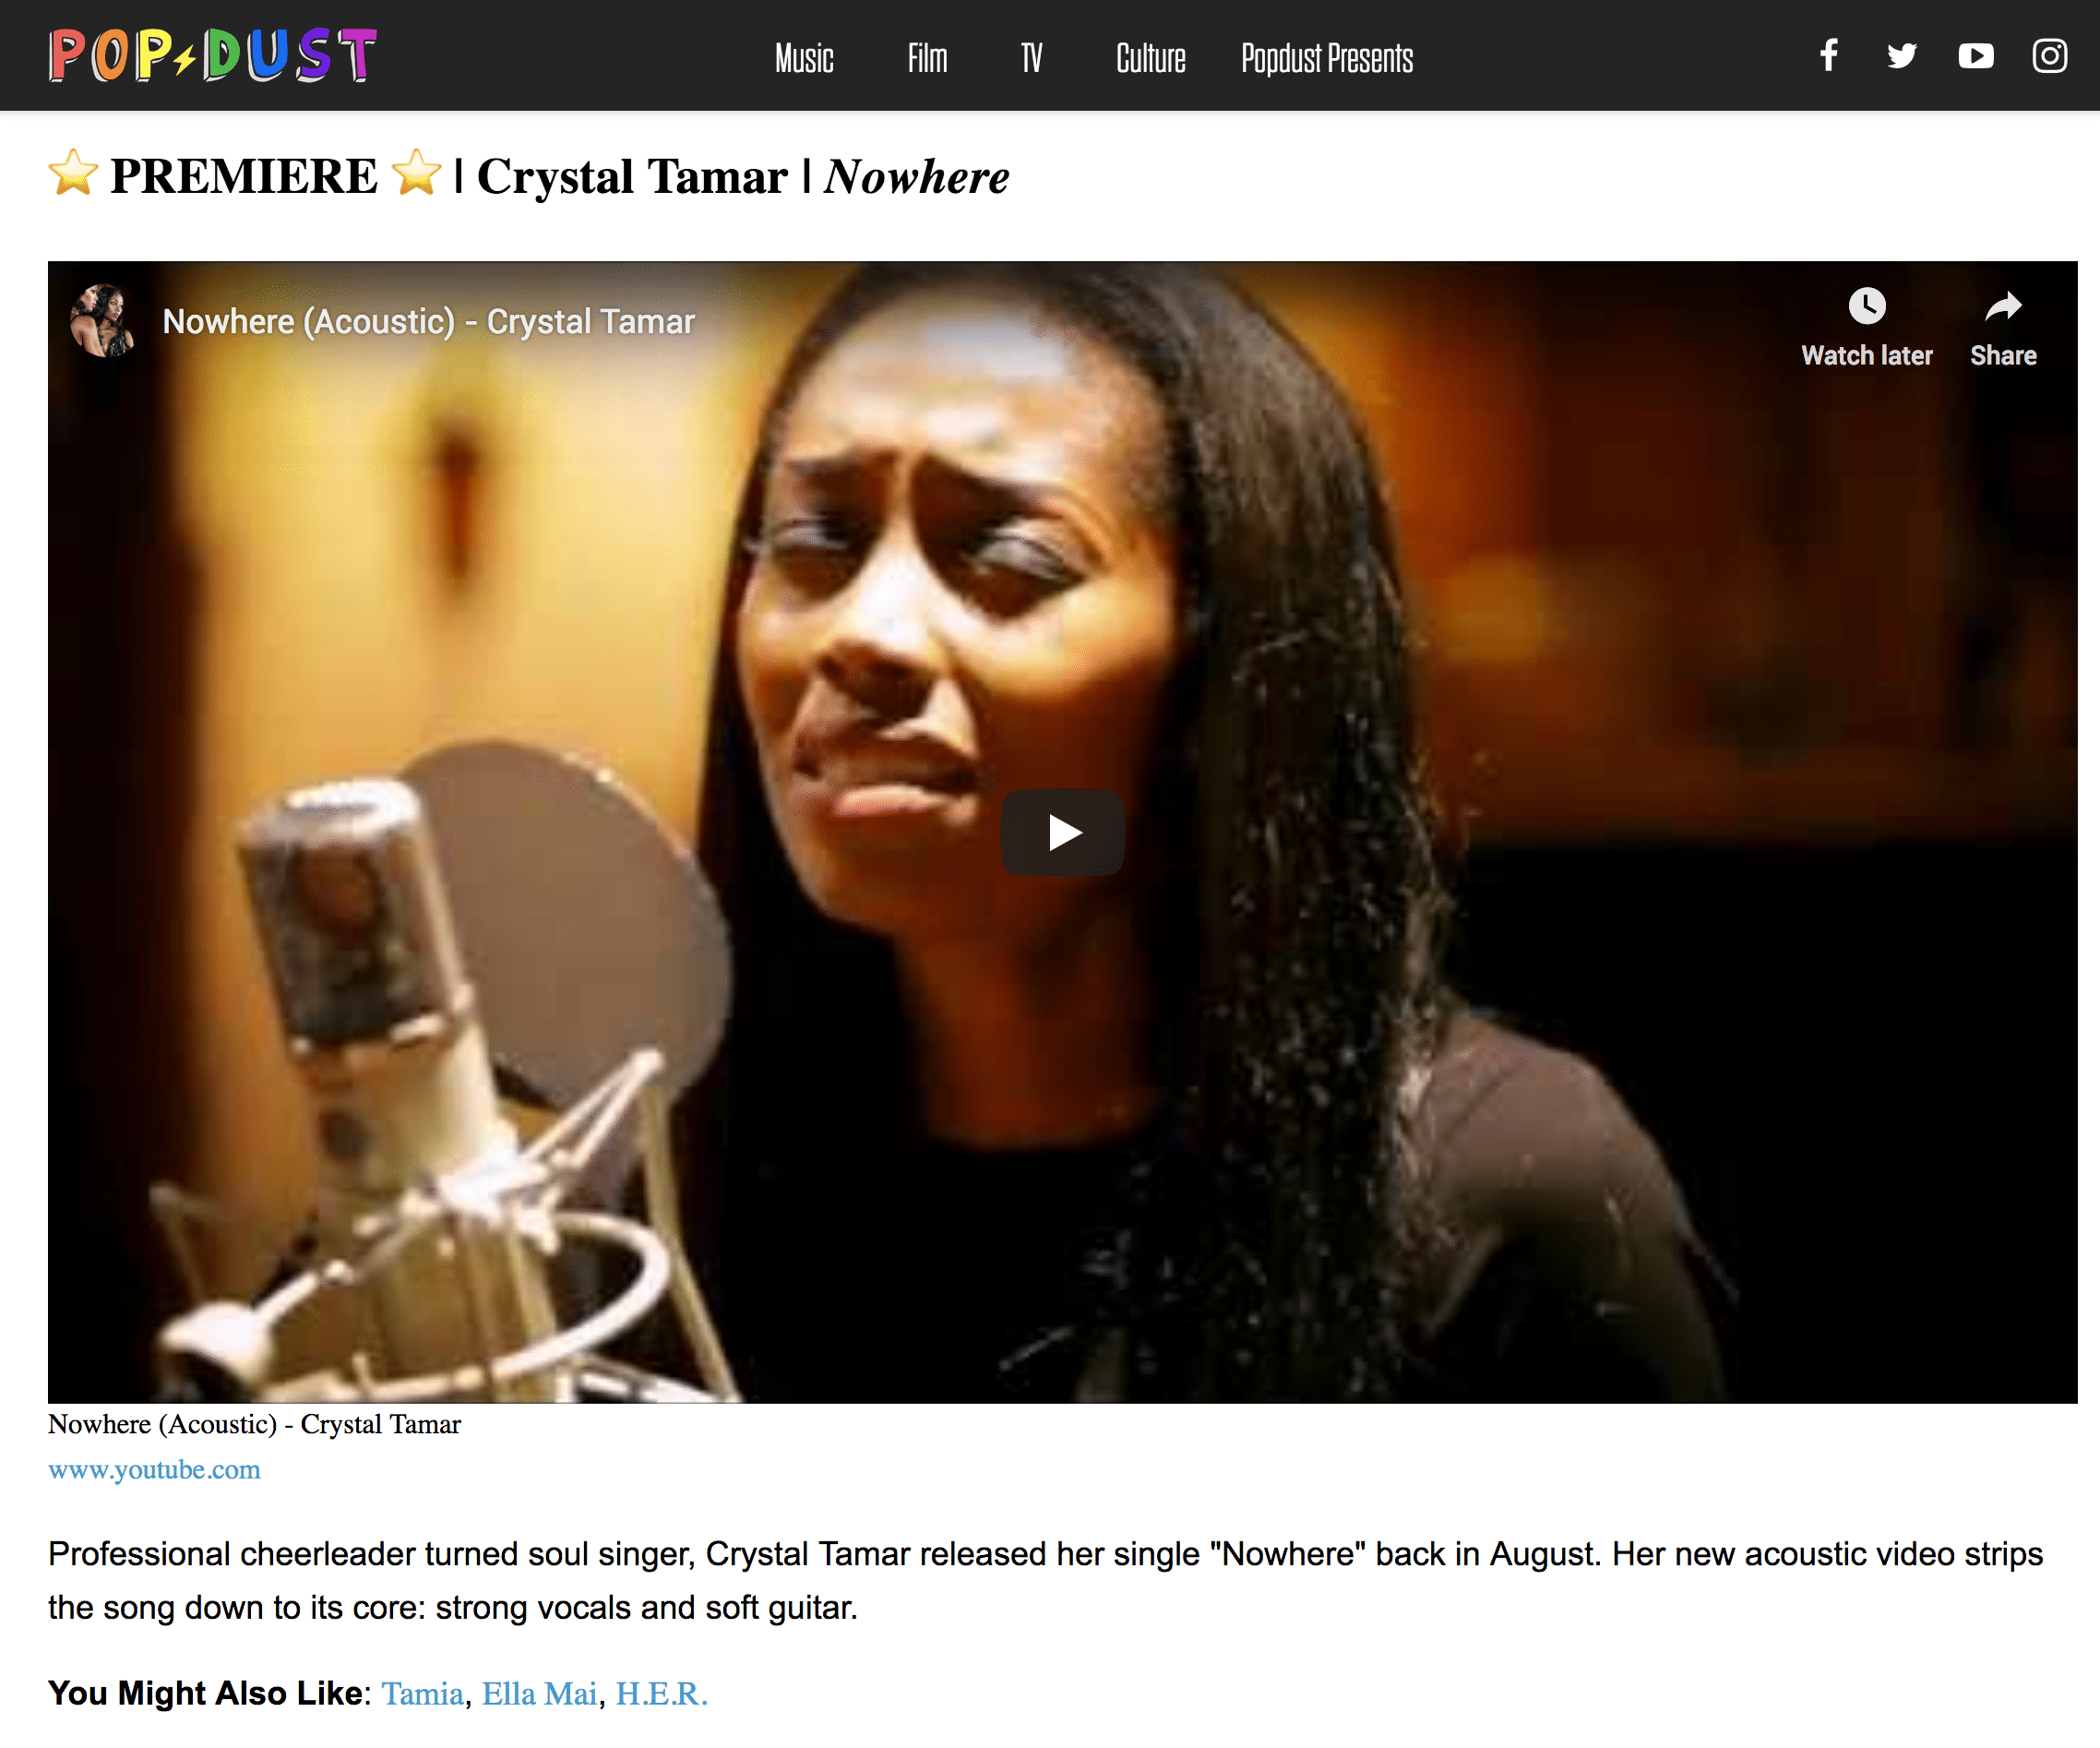 Popdust features Crystal Tamar